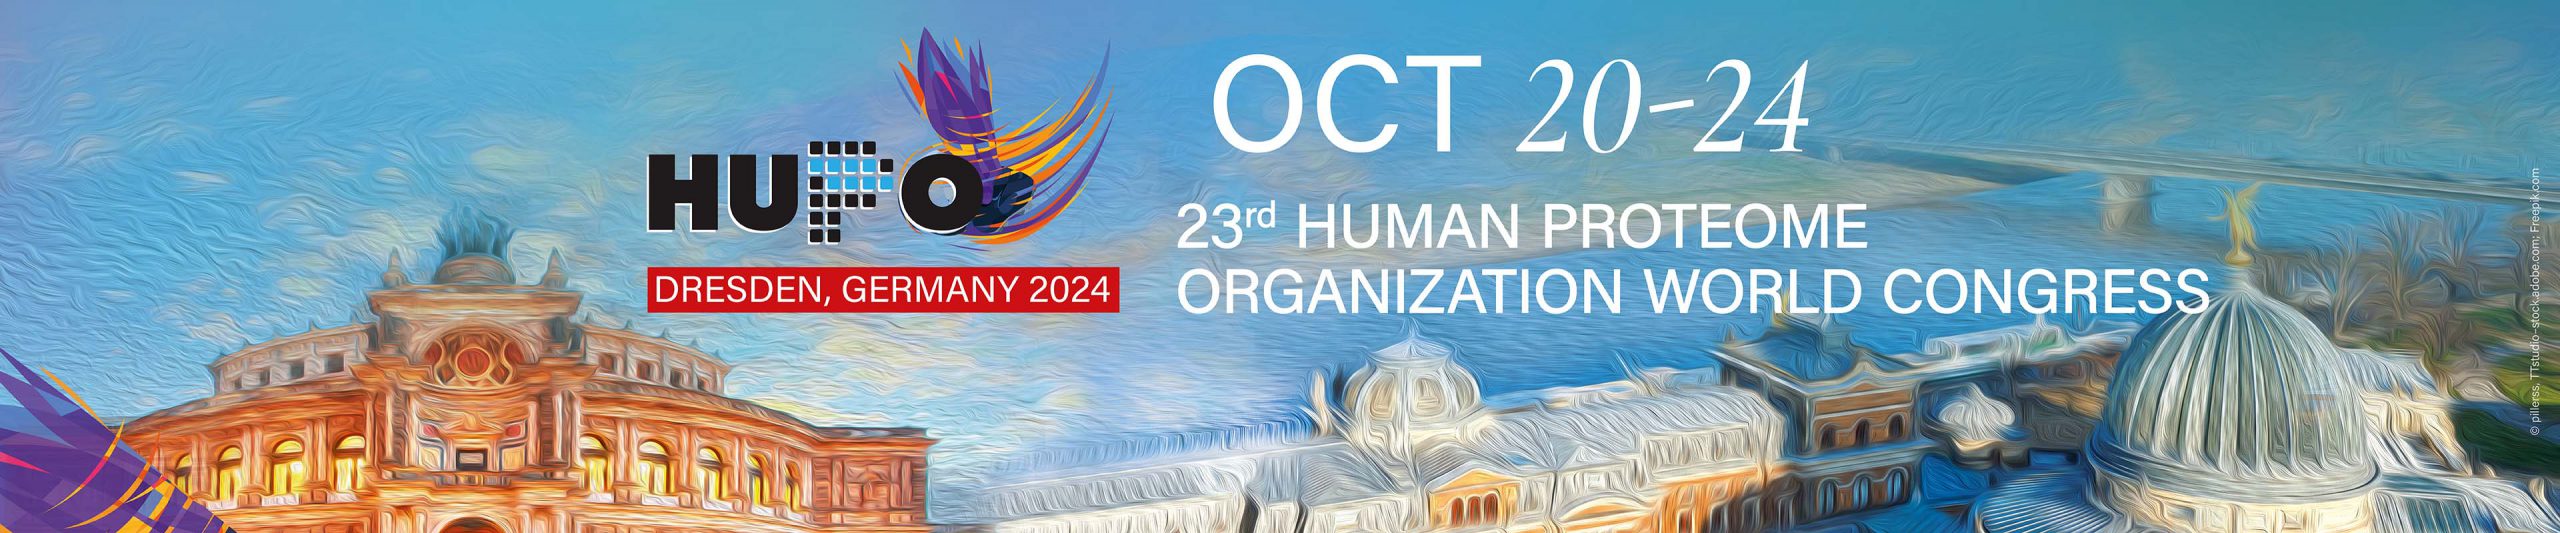 23rd Human Proteome Organization World Congress. 20th-24th October. Dresden (Germany)